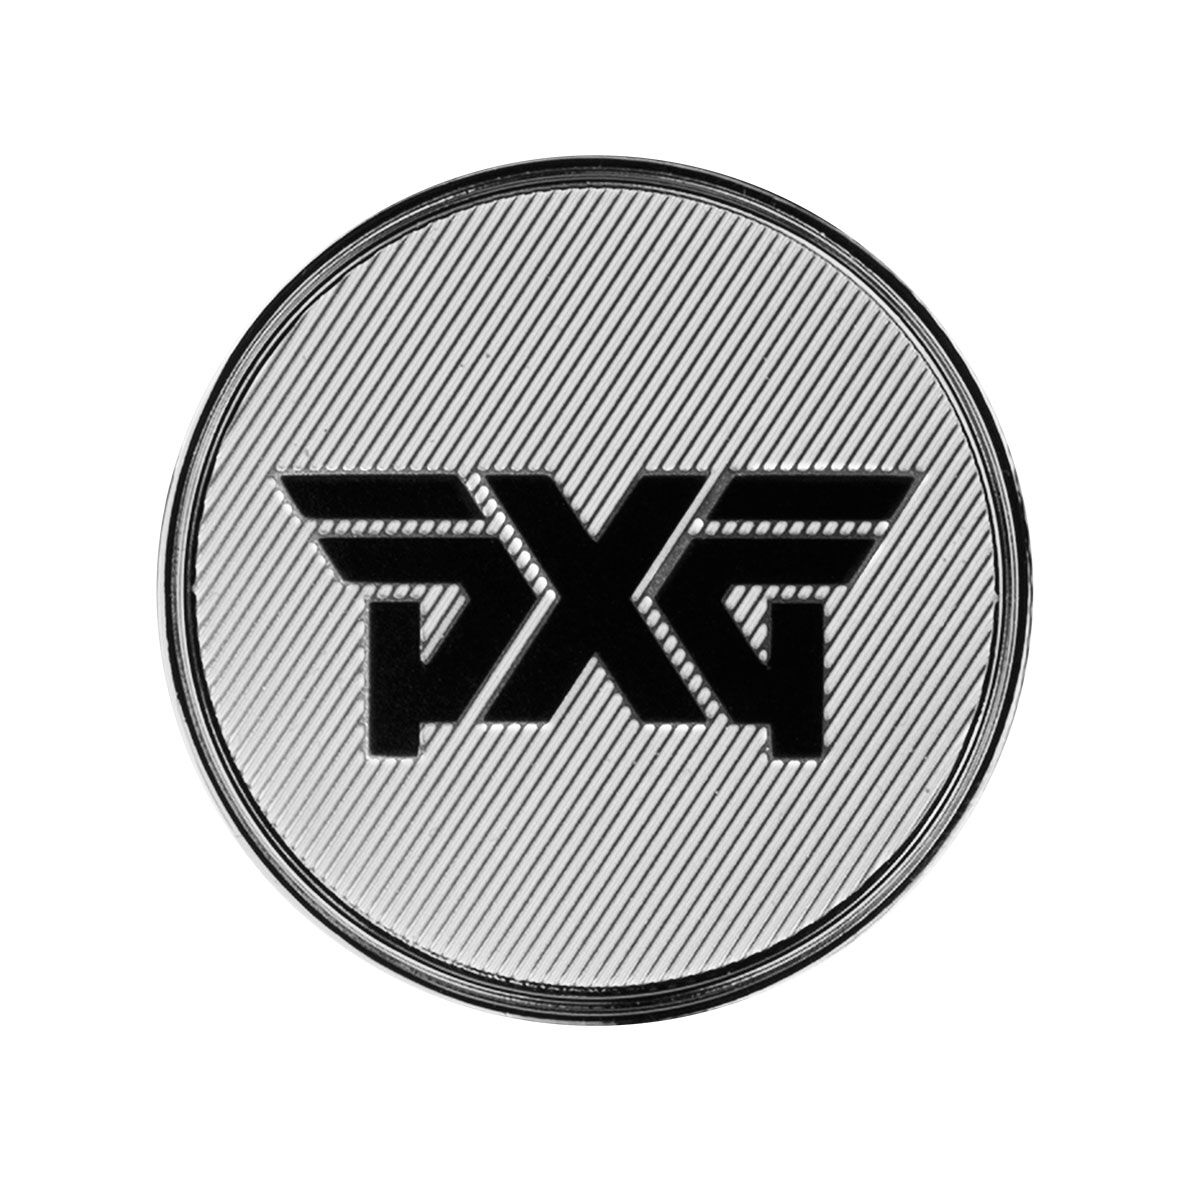 Parsons XTreme Golf Chrome Golf Ball Marker | American Golf, One Size